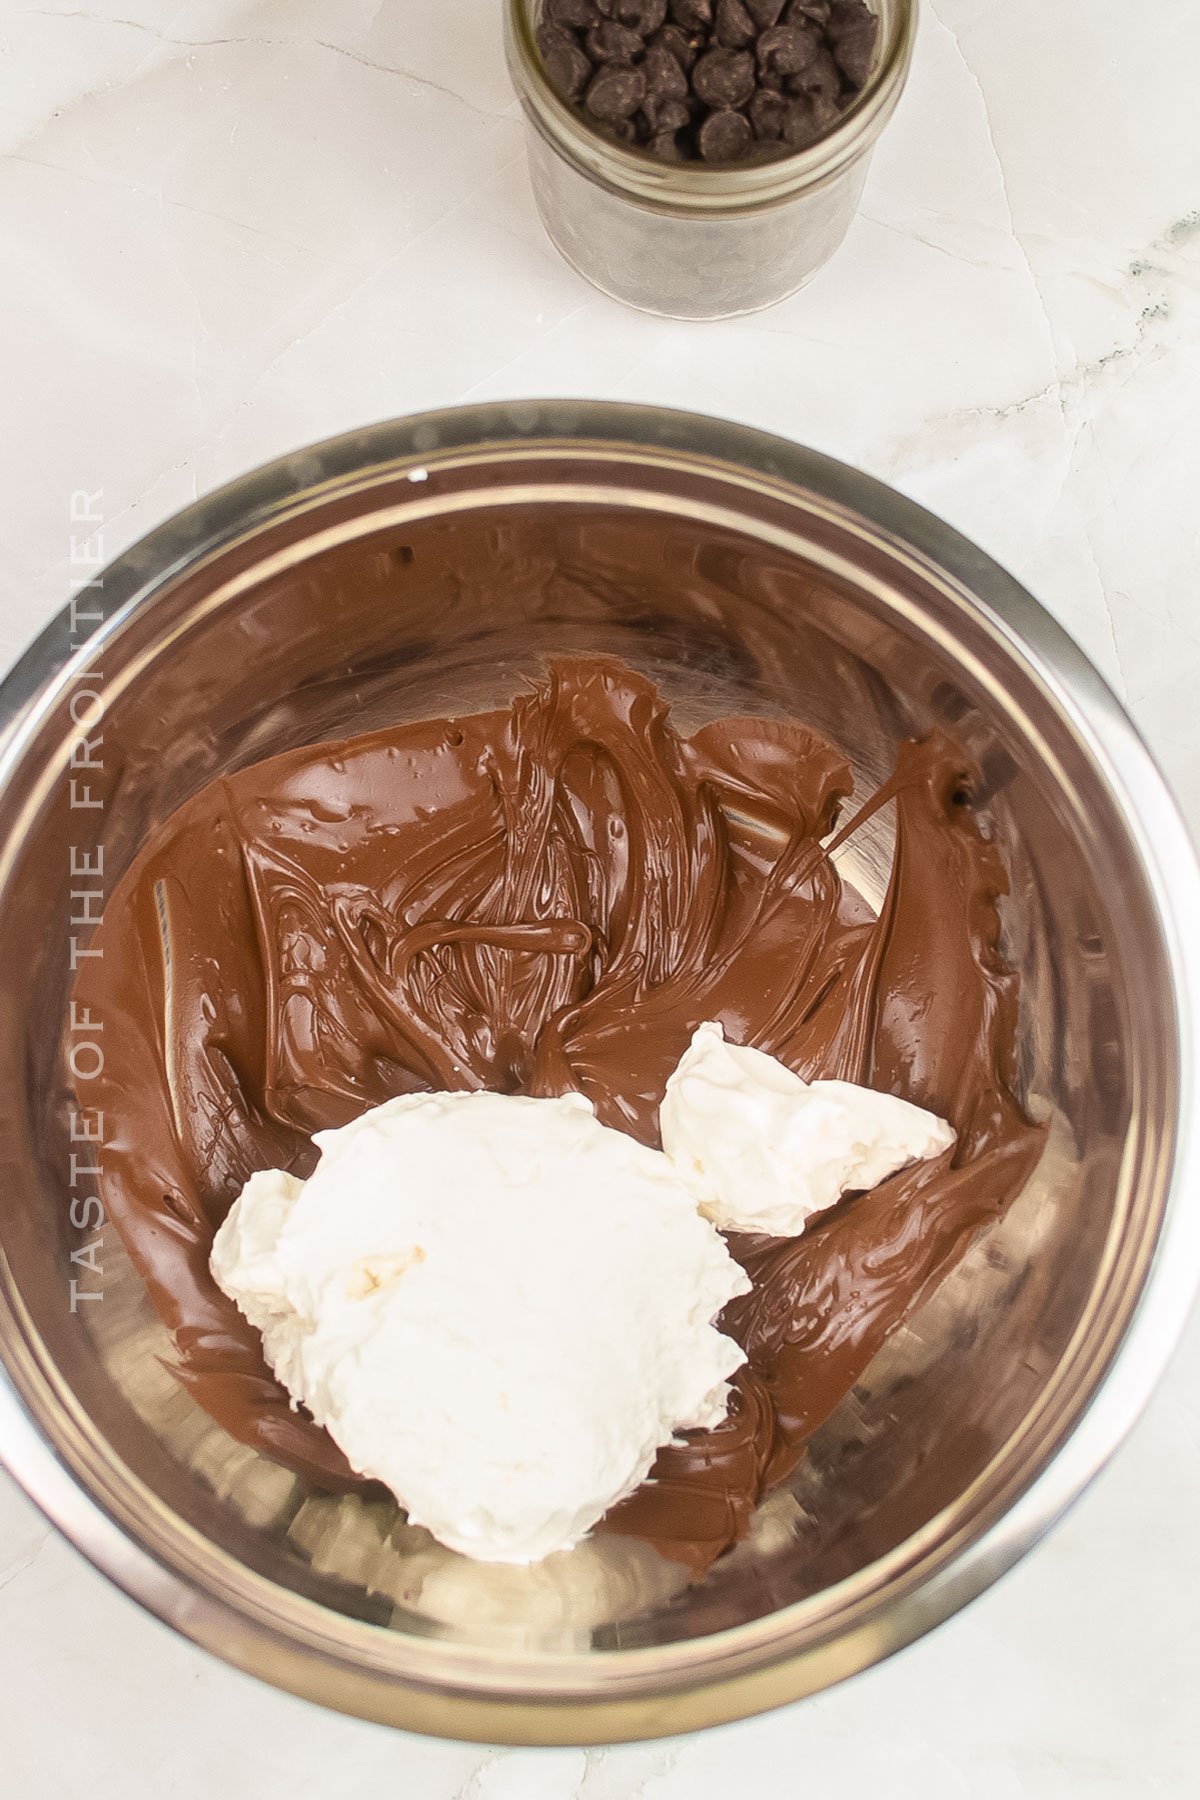 mixing the chocolate and whipped topping